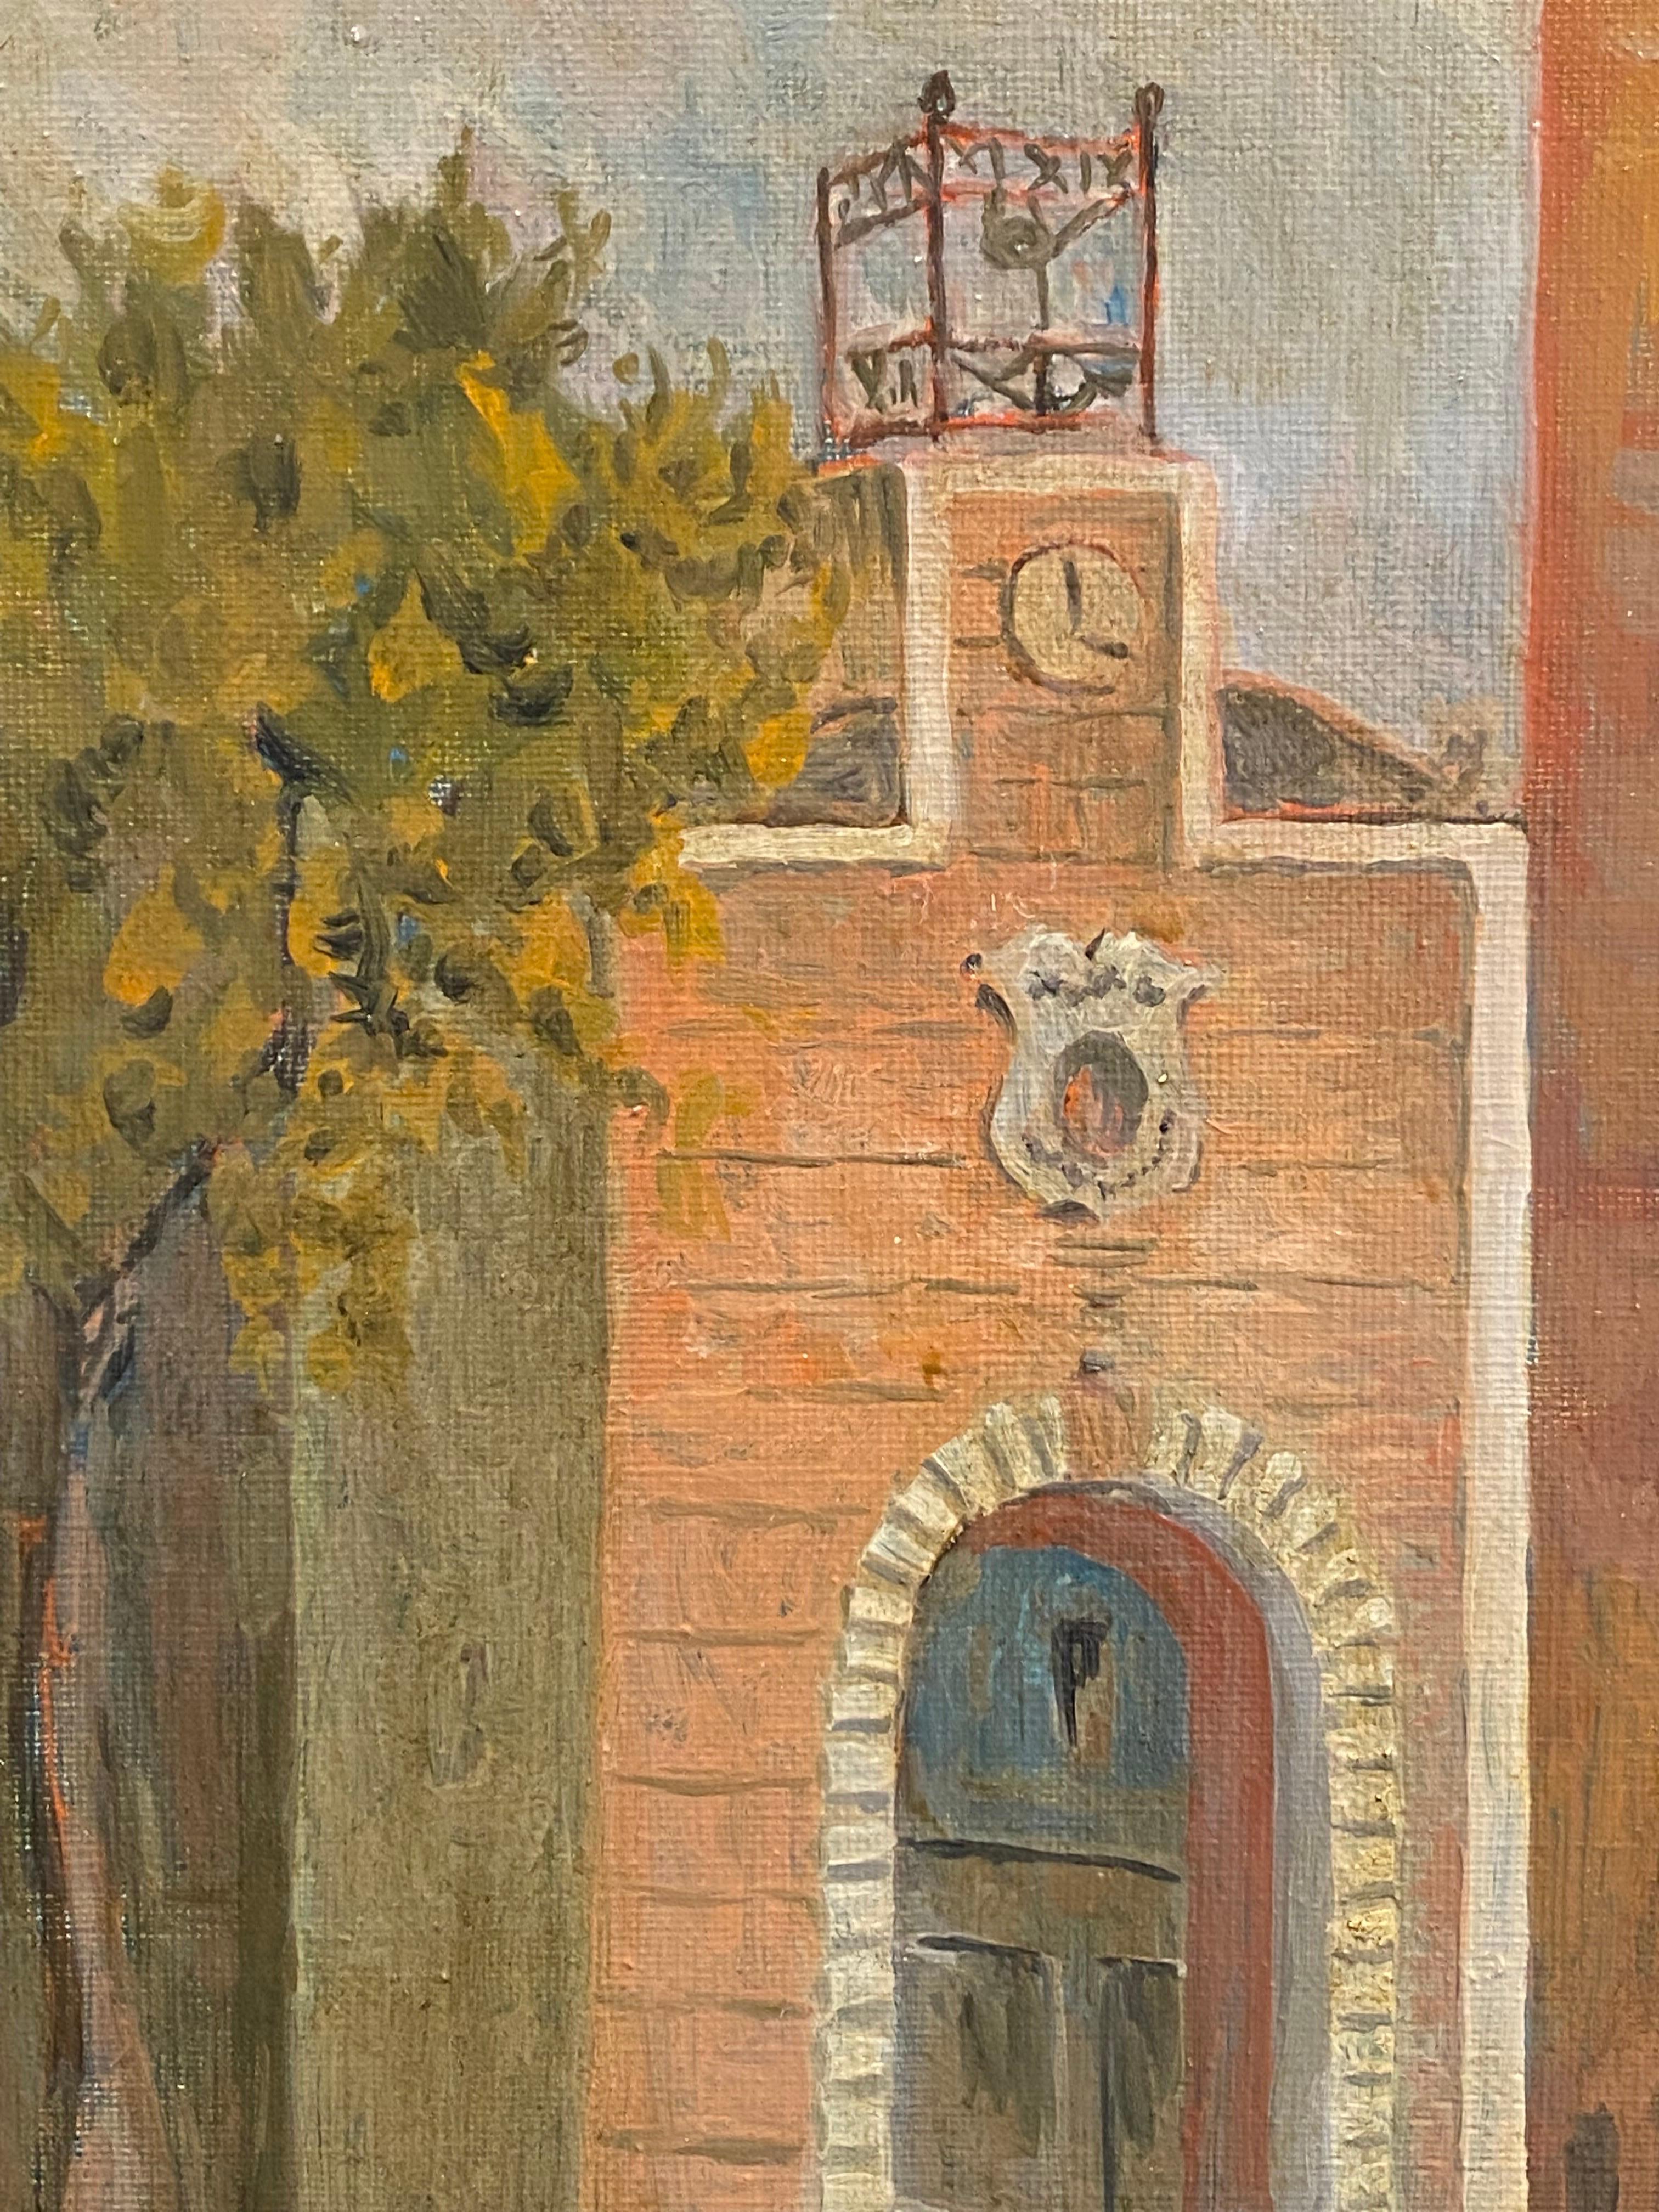 Artist/ School: Benard Labbe

Title: The Old Church

Medium: oil painting on board, unframed

Size:

board: 8.75 x 7.25 inches

Provenance: private collection, France

Condition: The painting is in overall very good and sound